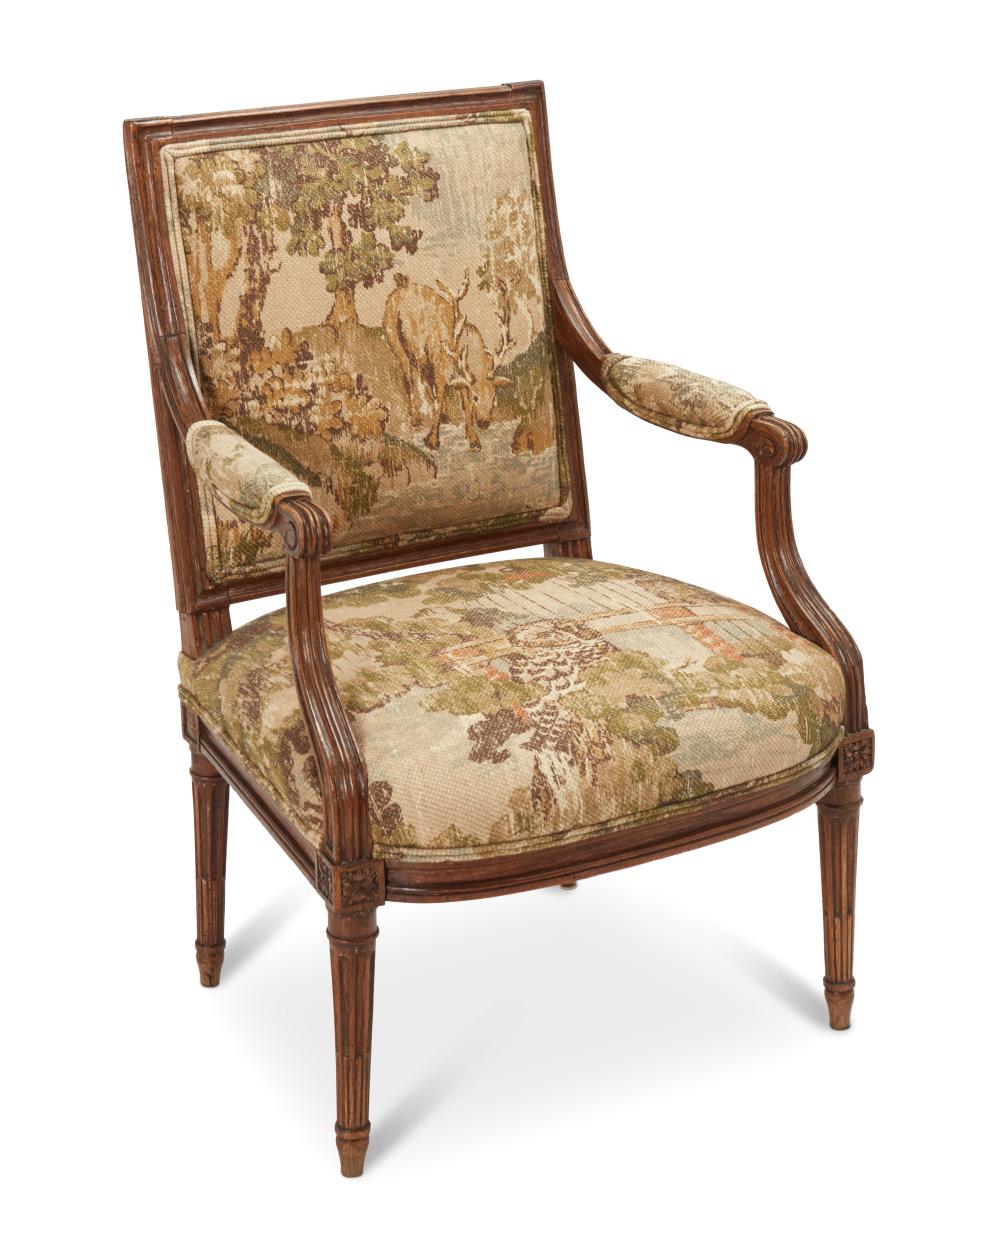 A FRENCH LOUIS XVI FAUTEUIL ARMCHAIR